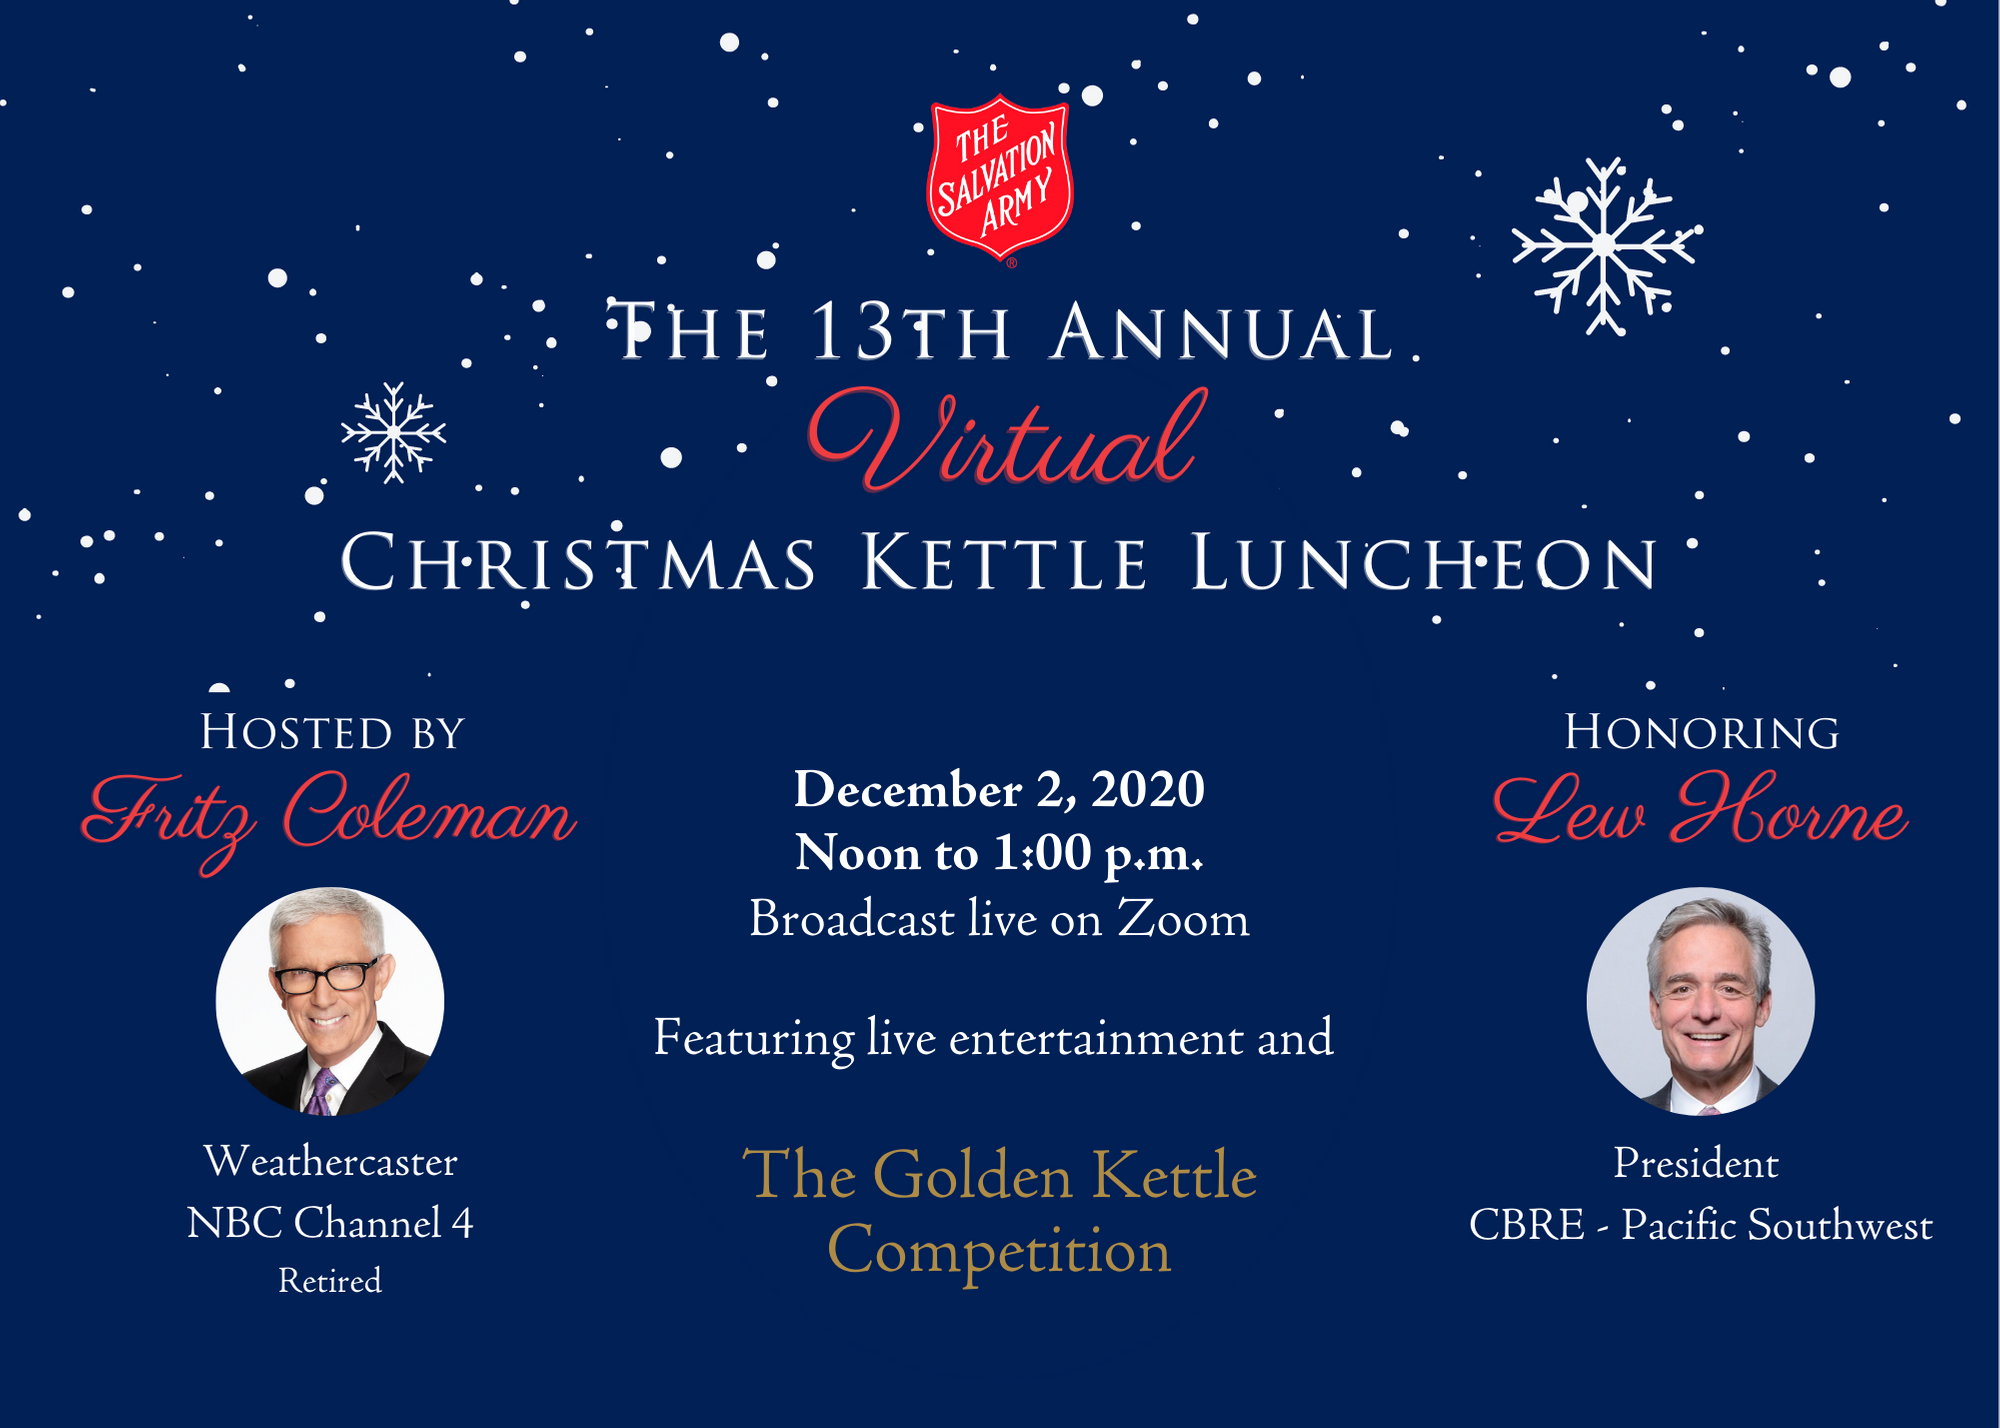 Your Invited! The Salvation Army's 15th Annual Christmas Kettle Luncheon, Los Angeles, lunch